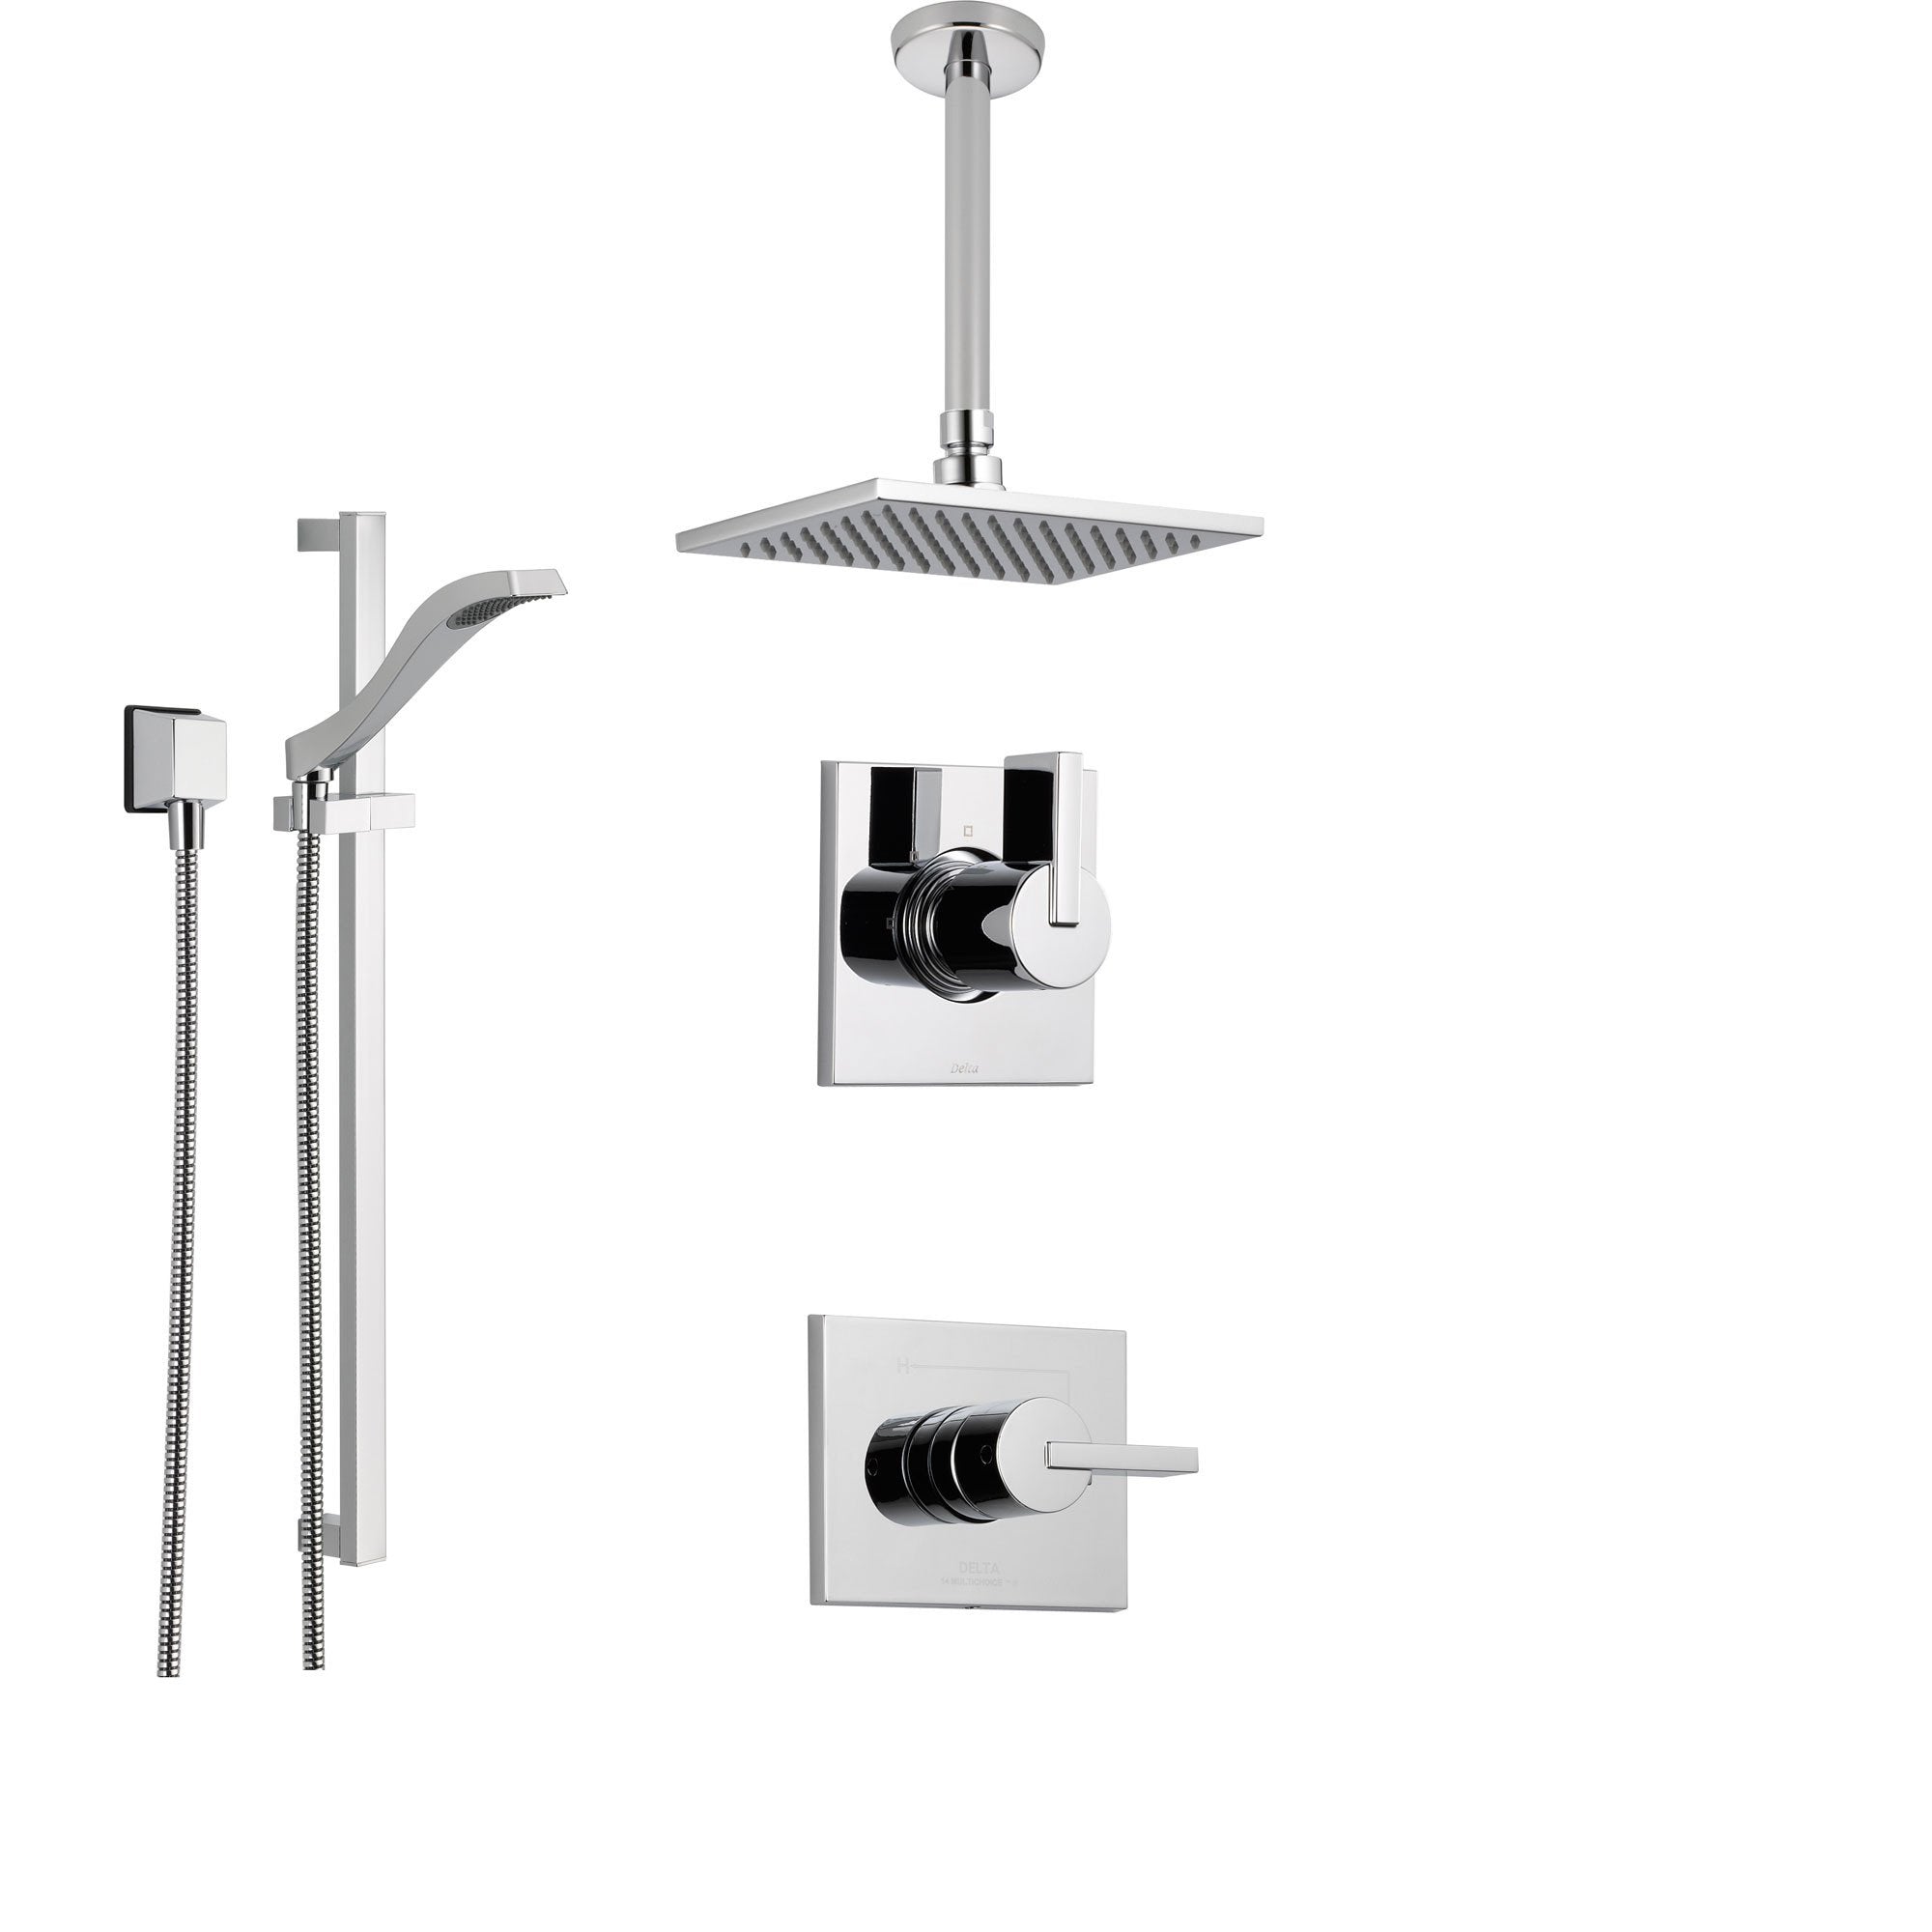 Delta Vero Chrome Shower System with Normal Shower Handle, 3-setting Diverter, Large Ceiling Mount Rain Showerhead, and Handheld Shower SS145383